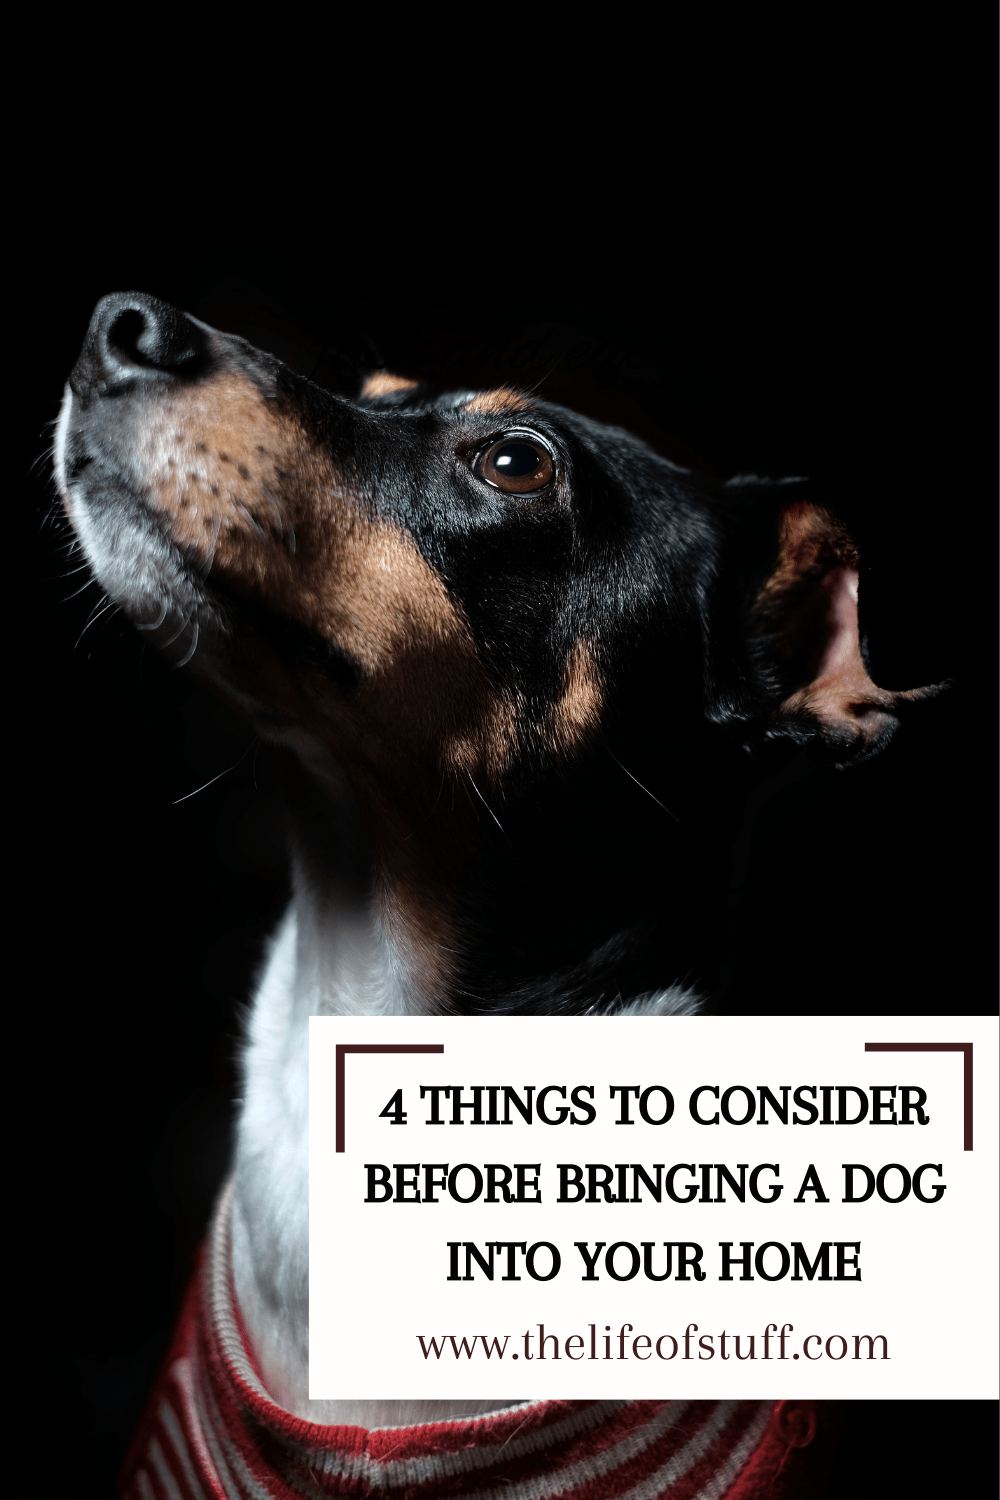 4 Things To Consider Before Bringing A Dog Into Your Home - The Life of Stuff